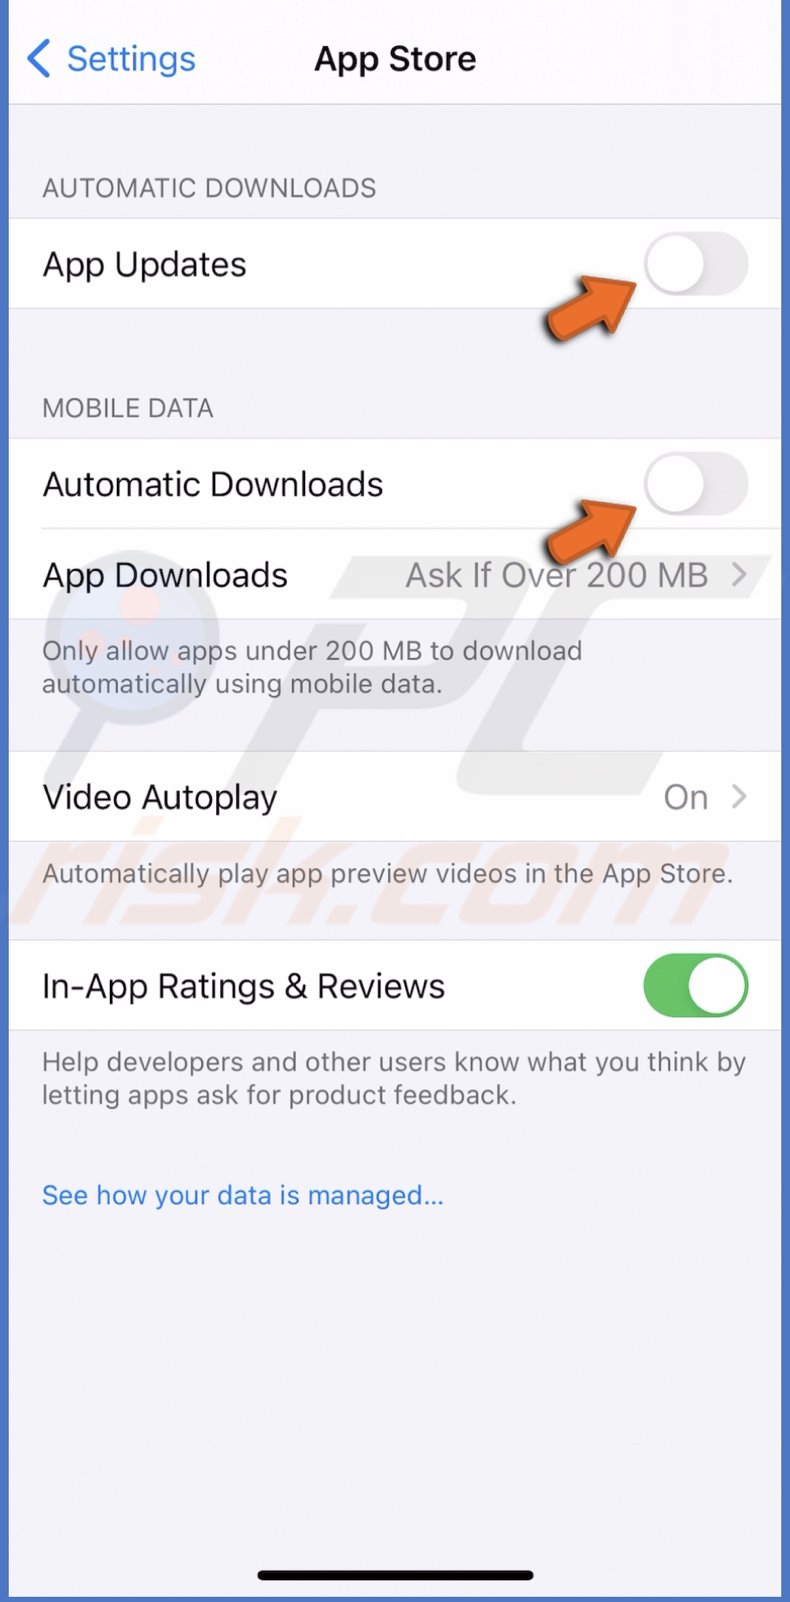 Disable app updates and automatic downloads